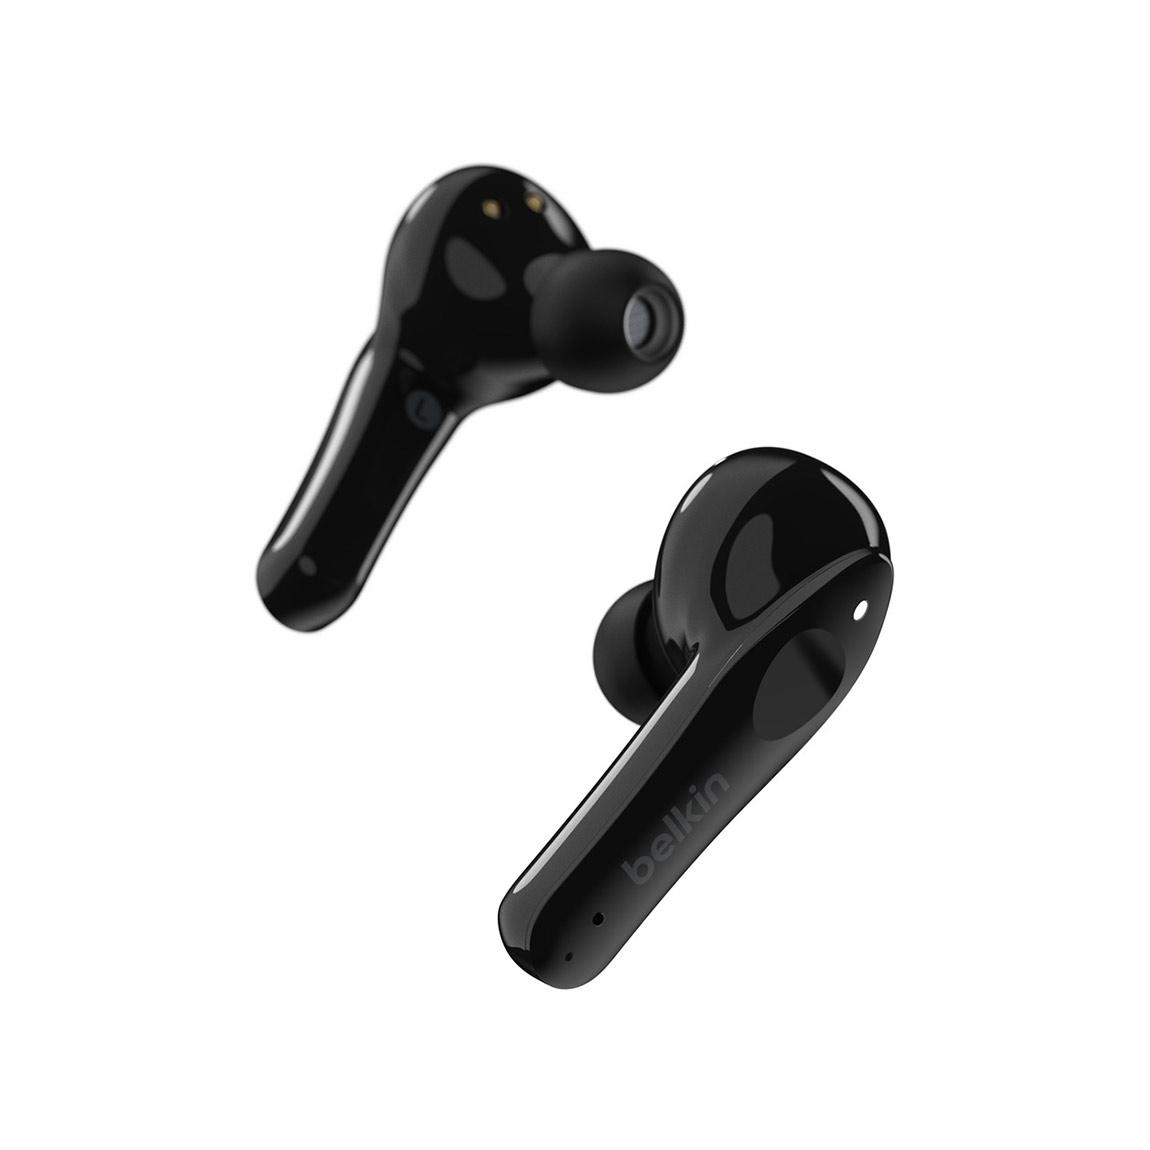 Belkin SOUNDFORM Move Plus - True Wireless Earbuds + kabelloses Ladecase + BoostCharge Drahtloses Ladegerät (10 W) - earbuds